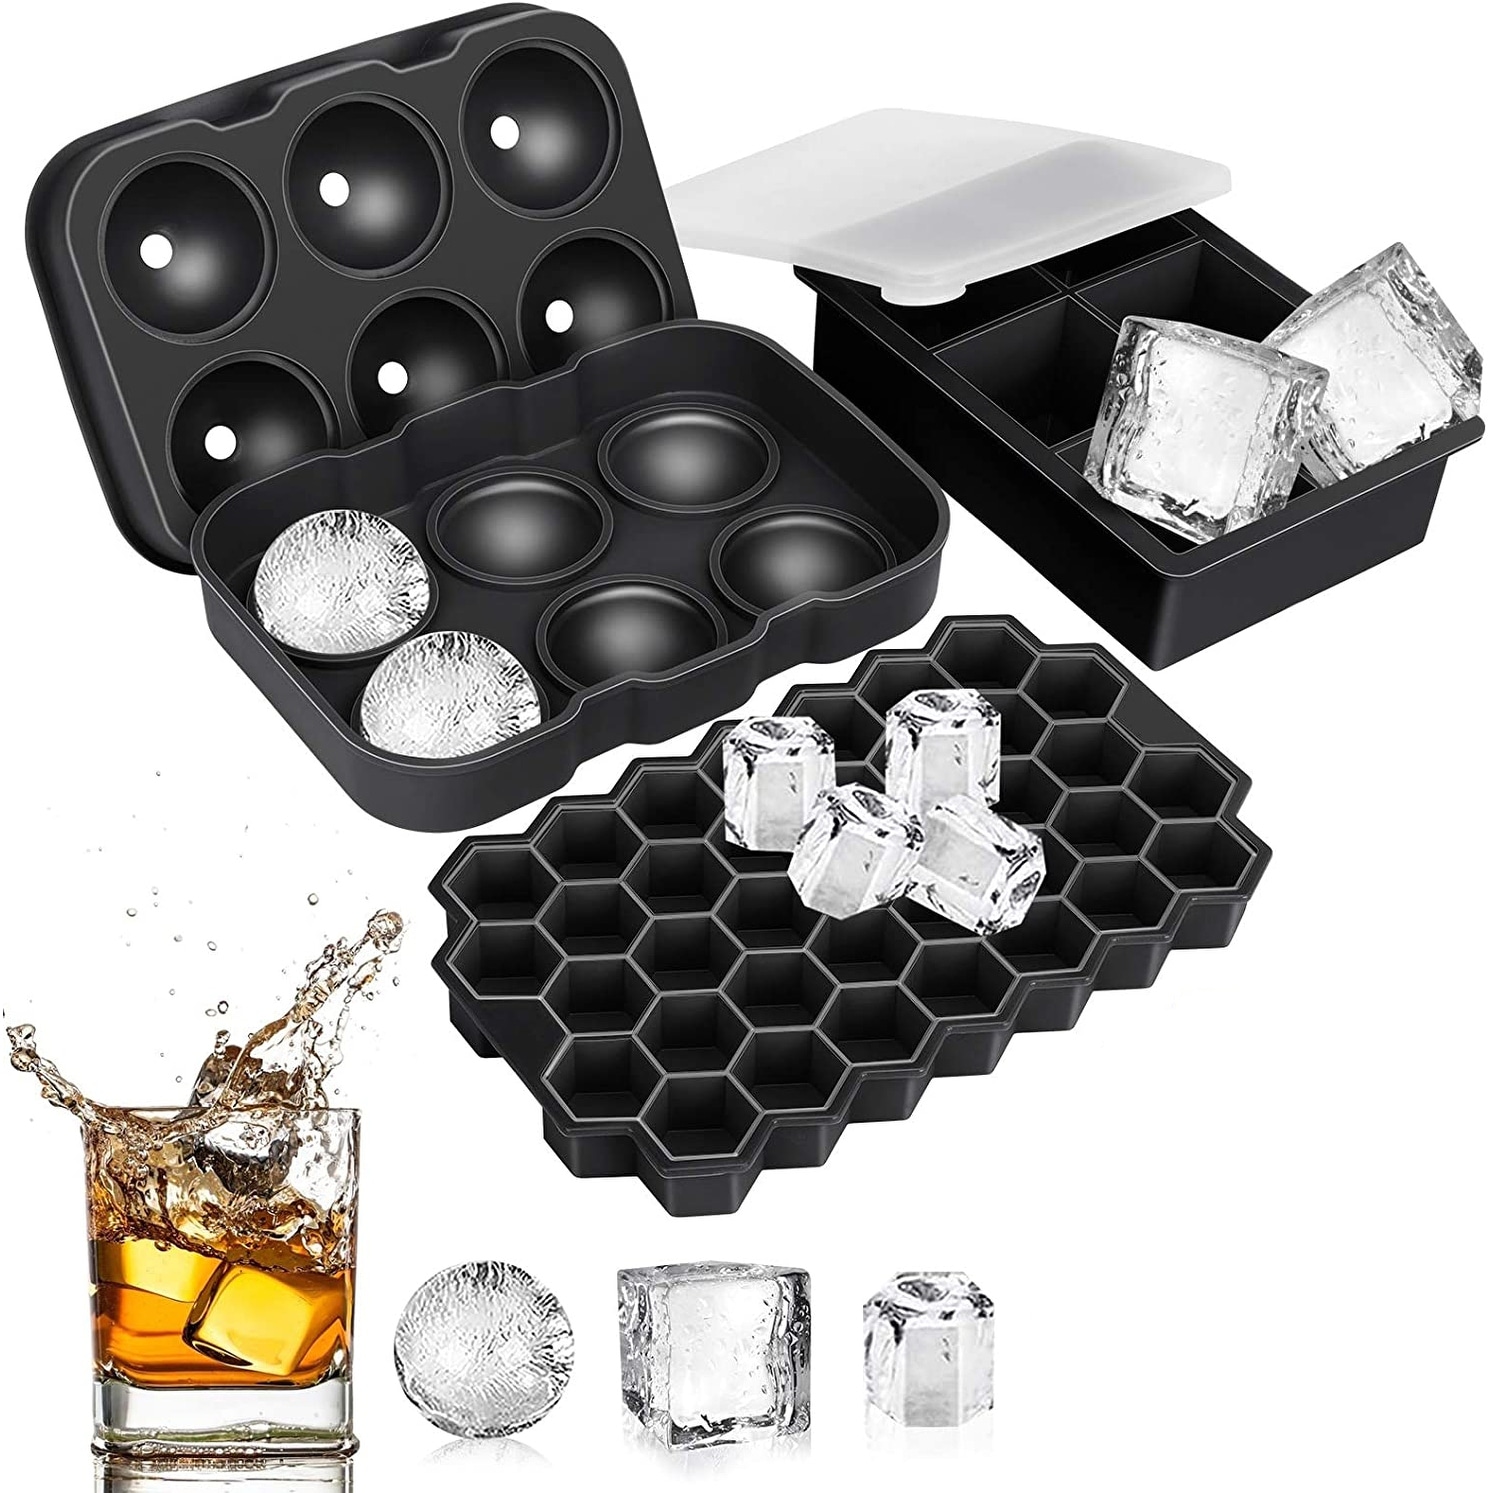 Football Ice Cube Mold Or Ice Ball Maker Is Ice Trays For Freezer